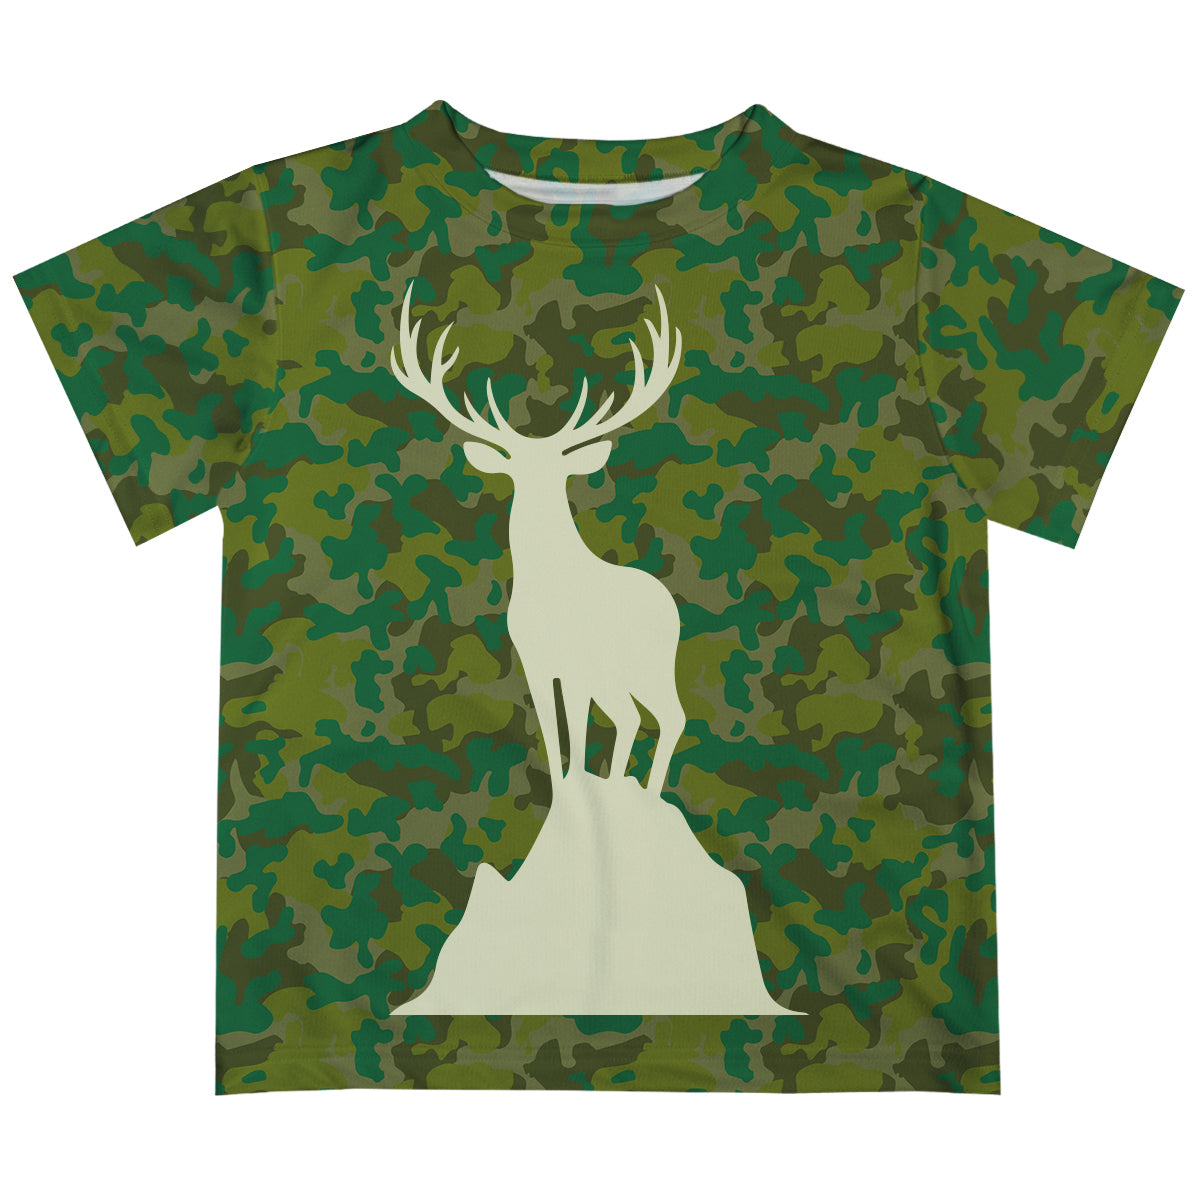 Boys green camo and olive deer short sleeve tee shirt with name - Wimziy&Co.